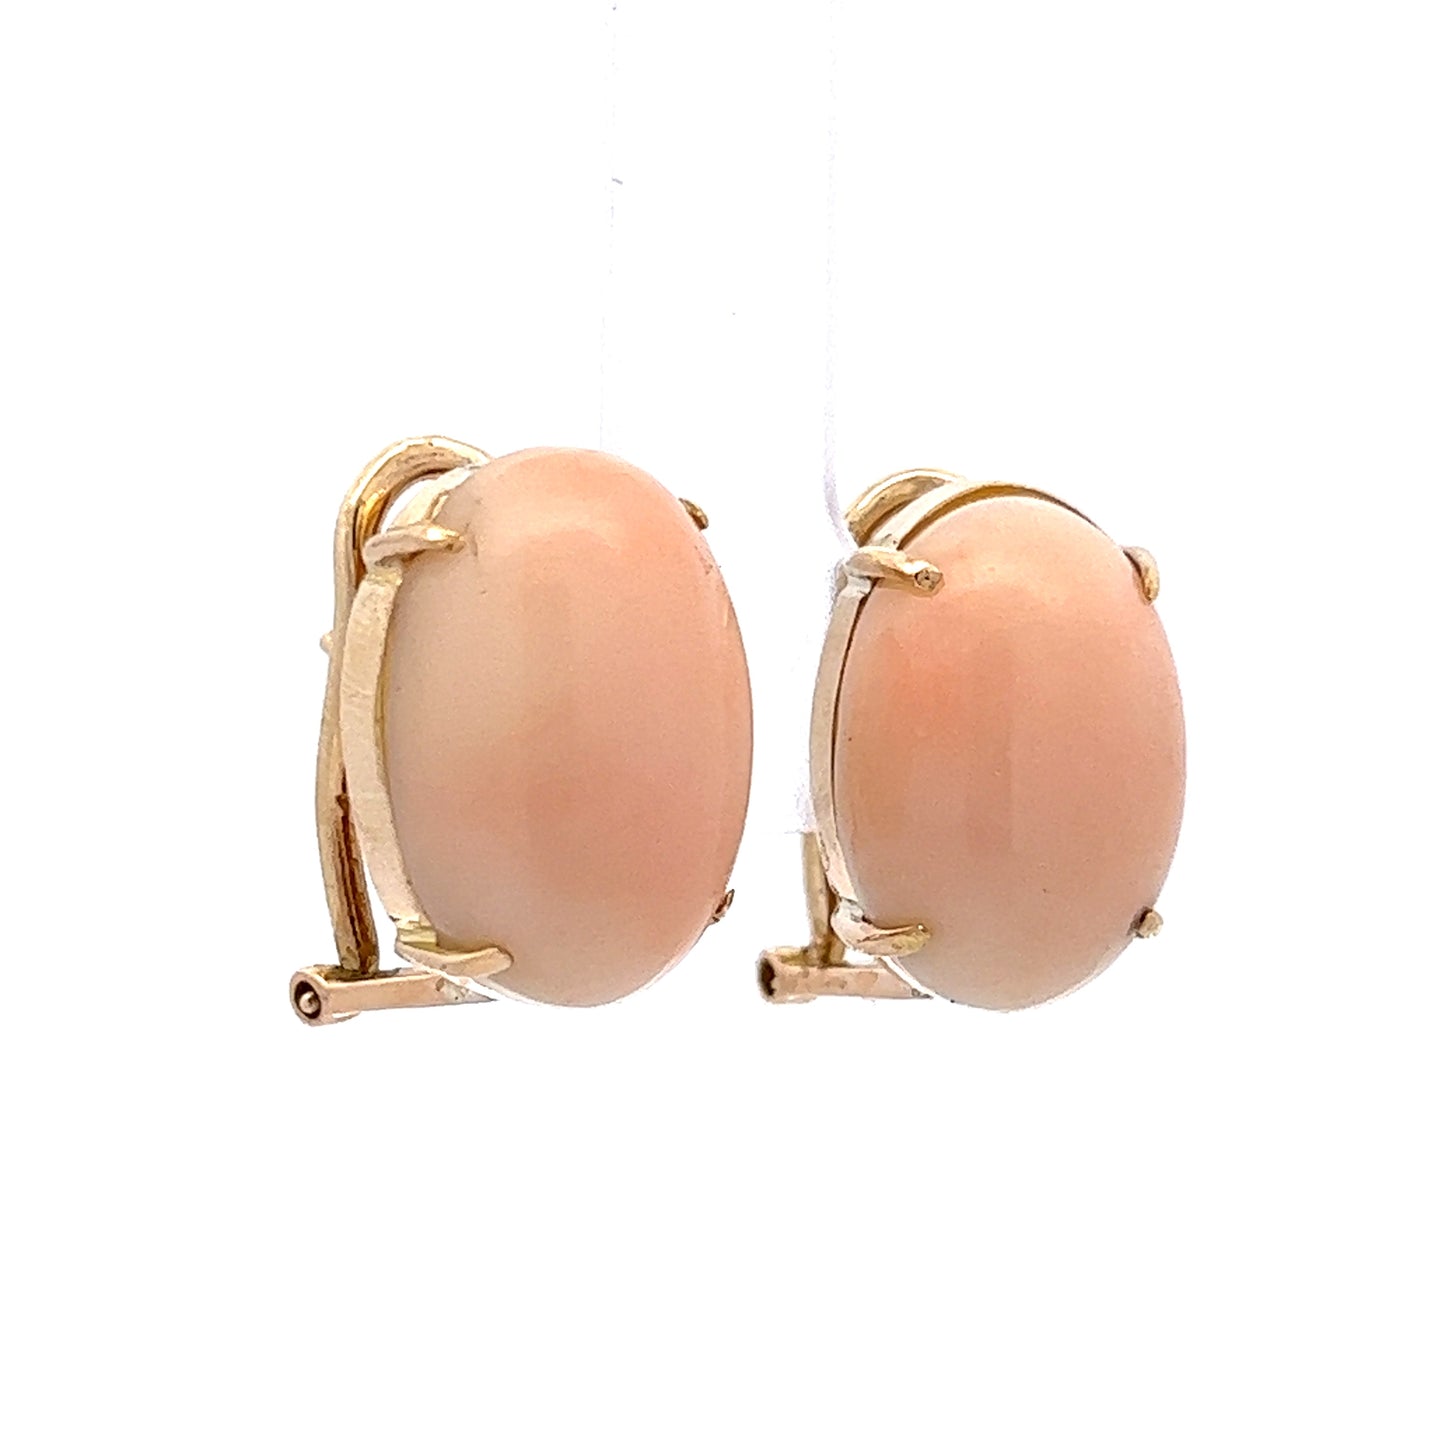 Cabochon Angel Skin Coral Earrings in 14k Yellow Gold